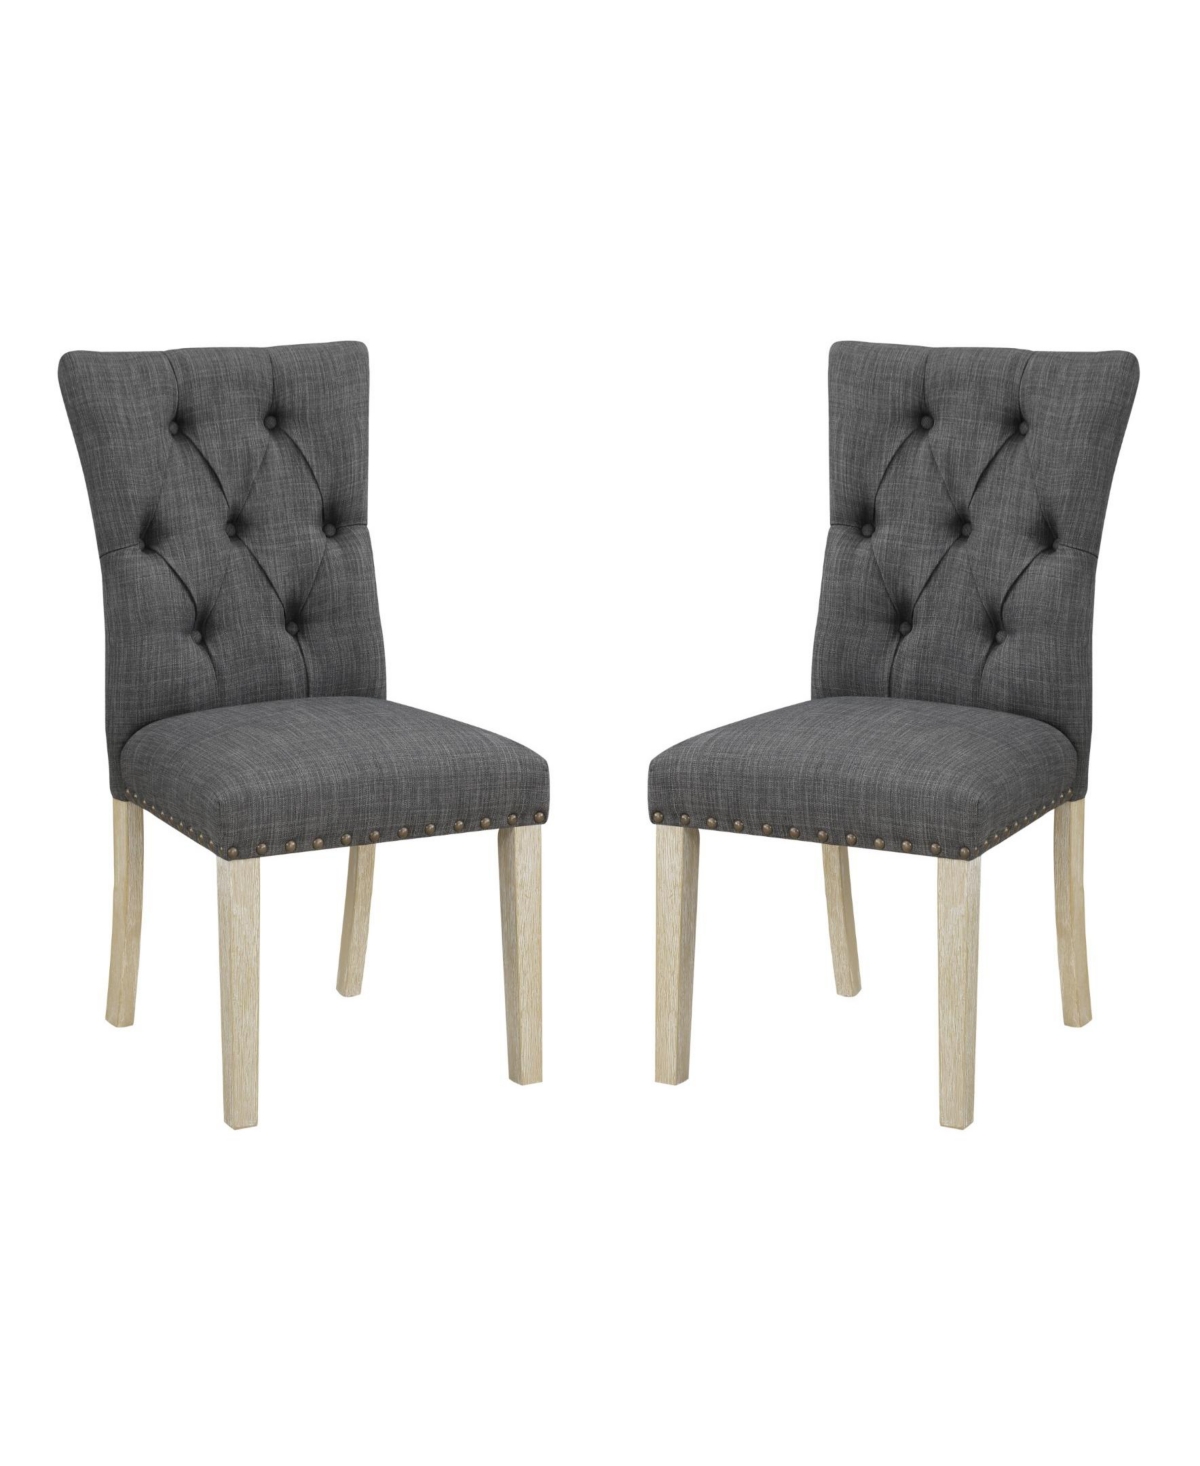 Shop Osp Home Furnishings Preston Dining Chair 2-pack With Antique-like Bronze Nailheads And Brushed Legs In Fabric In Charcoal